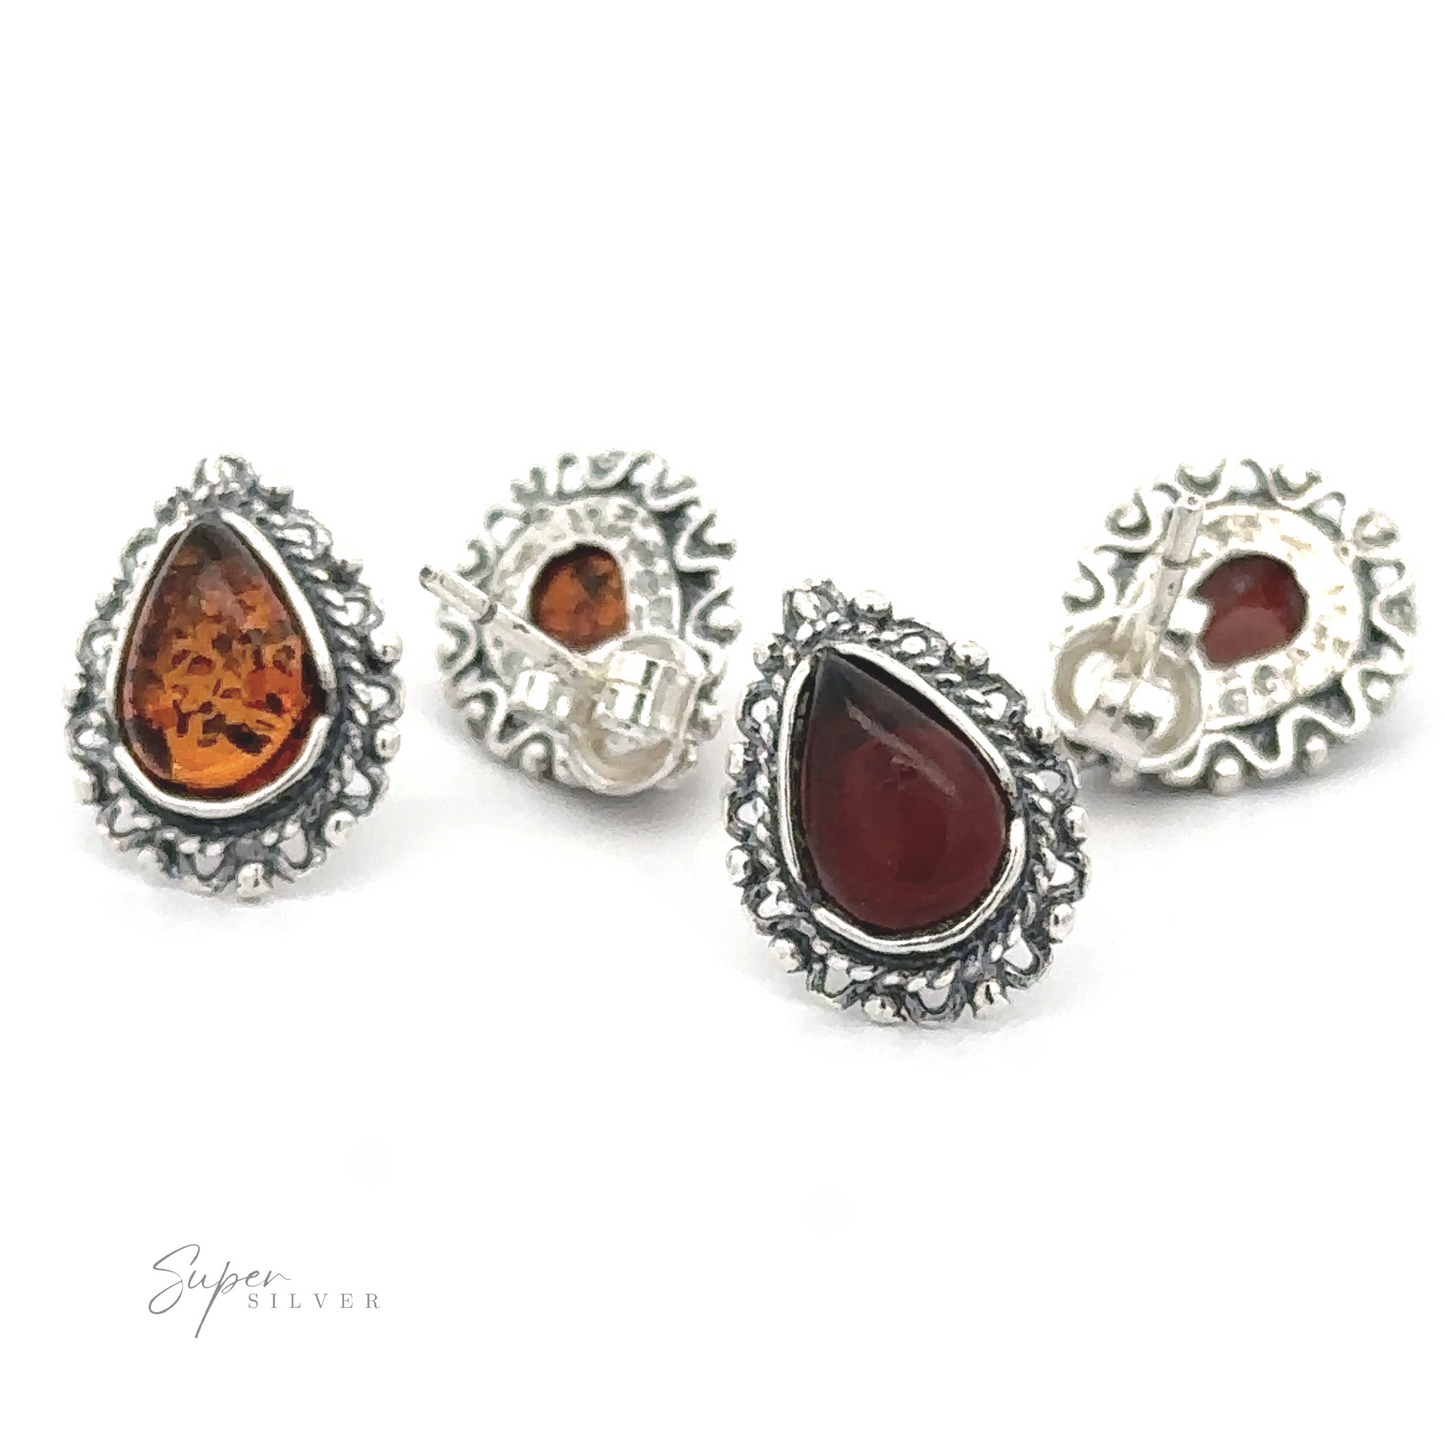 
                  
                    Four Framed Teardrop Amber Studs with intricate designs and teardrop-shaped Baltic amber stones, displayed on a white background. The brand name "Super Silver" is visible in the bottom left corner, evoking a sense of vintage romance.
                  
                